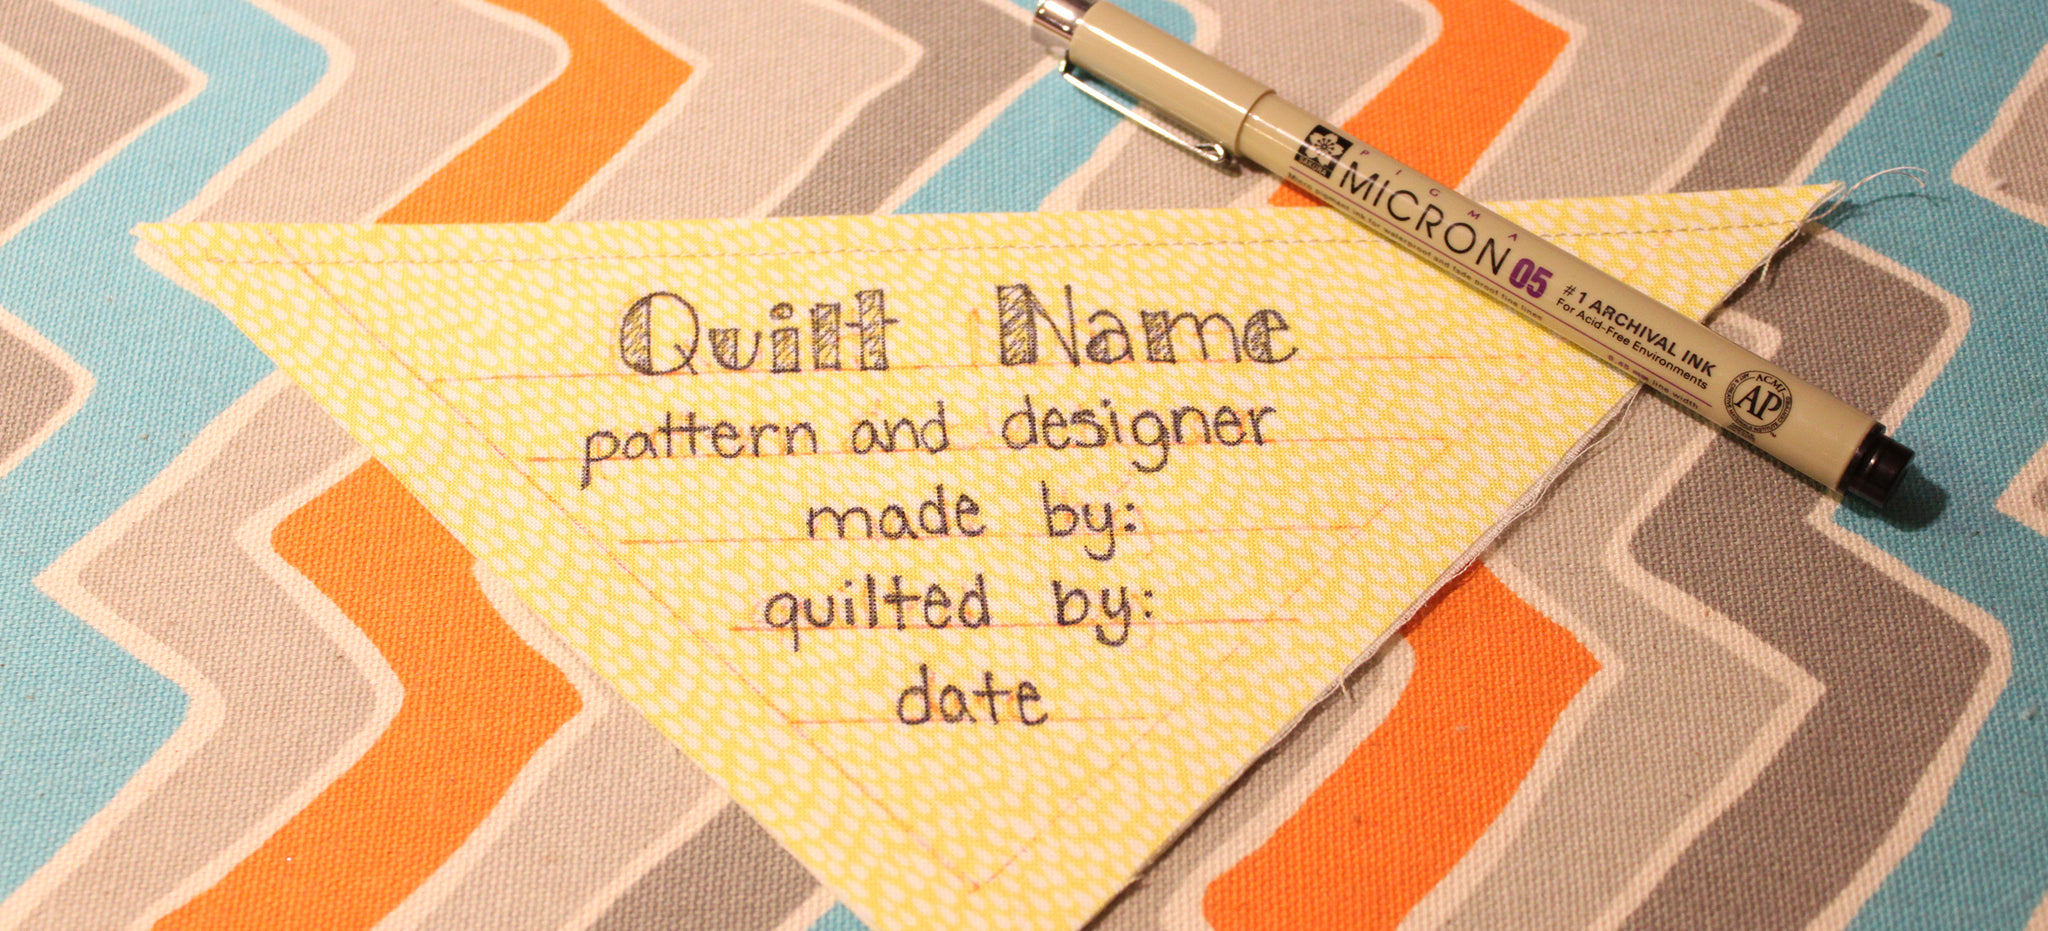 Make Easy Quilt Labels with Fabric Markers - QUILTINGINTHELOFT